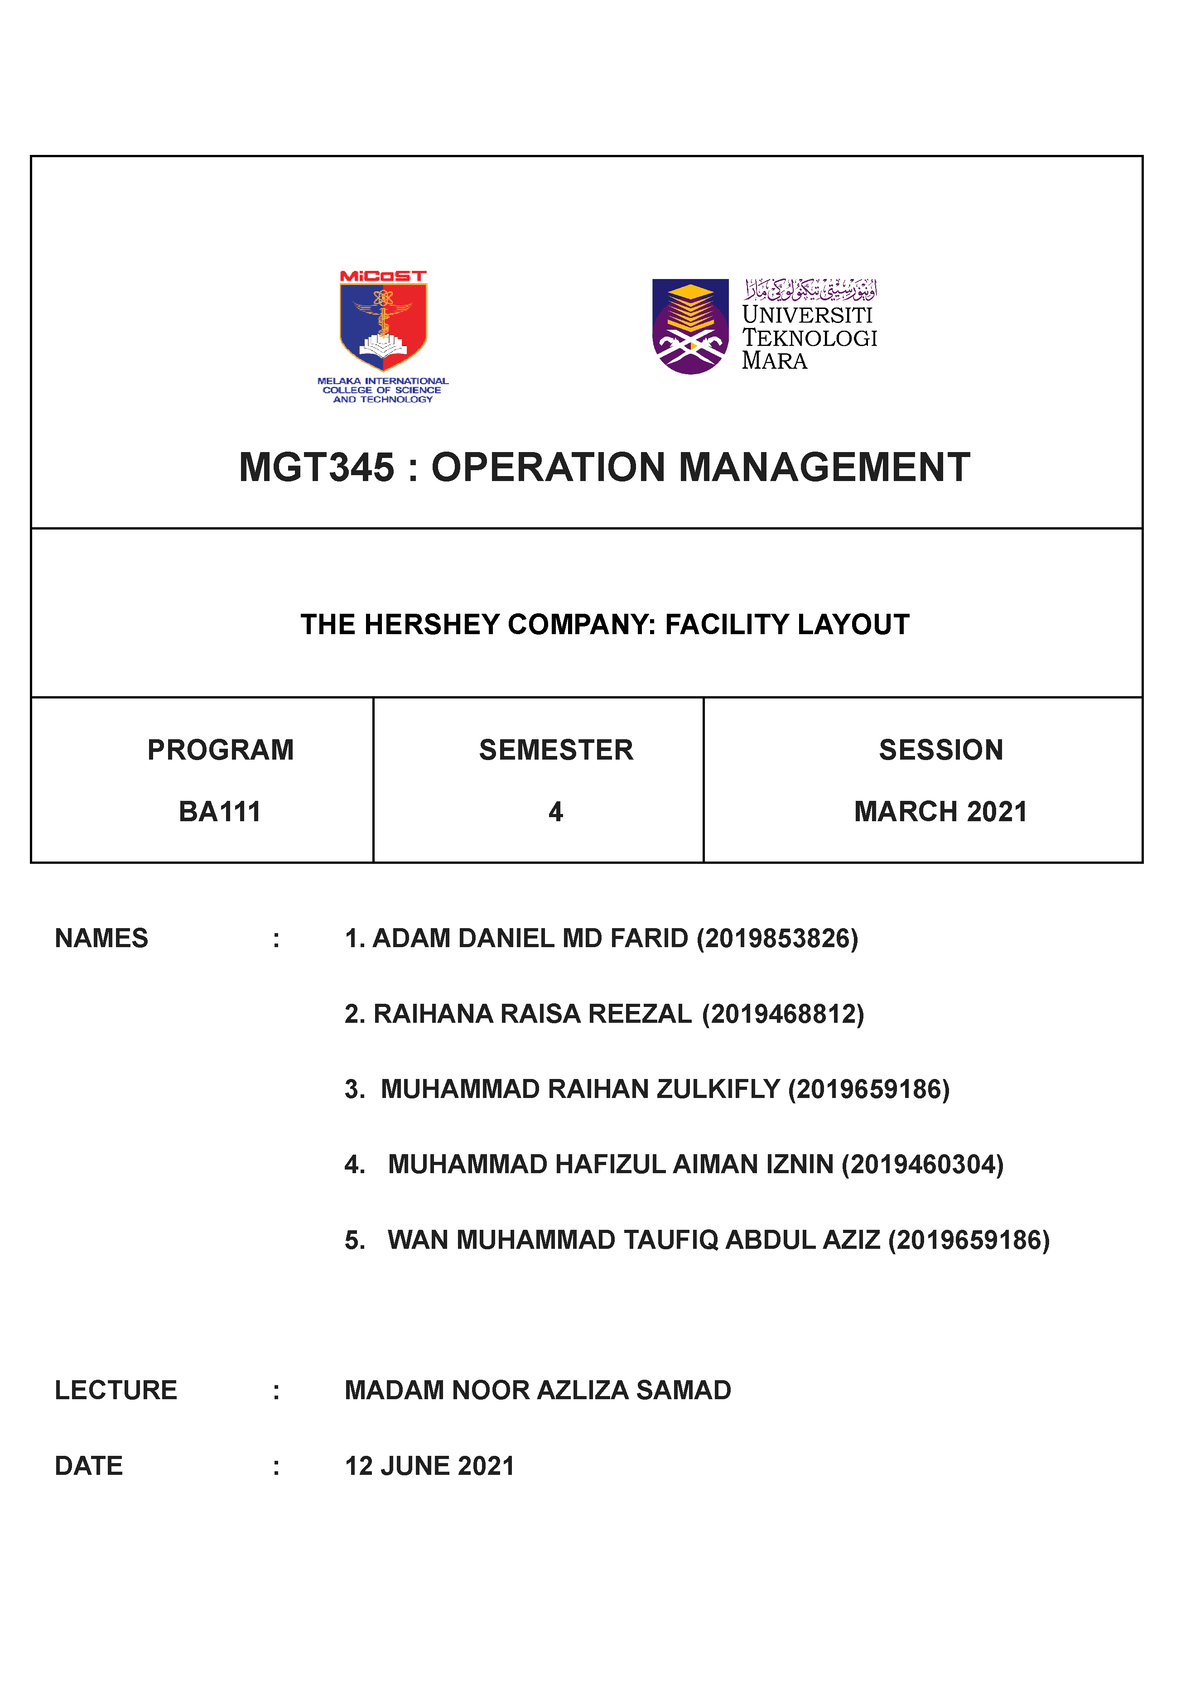 mgt345 group assignment report